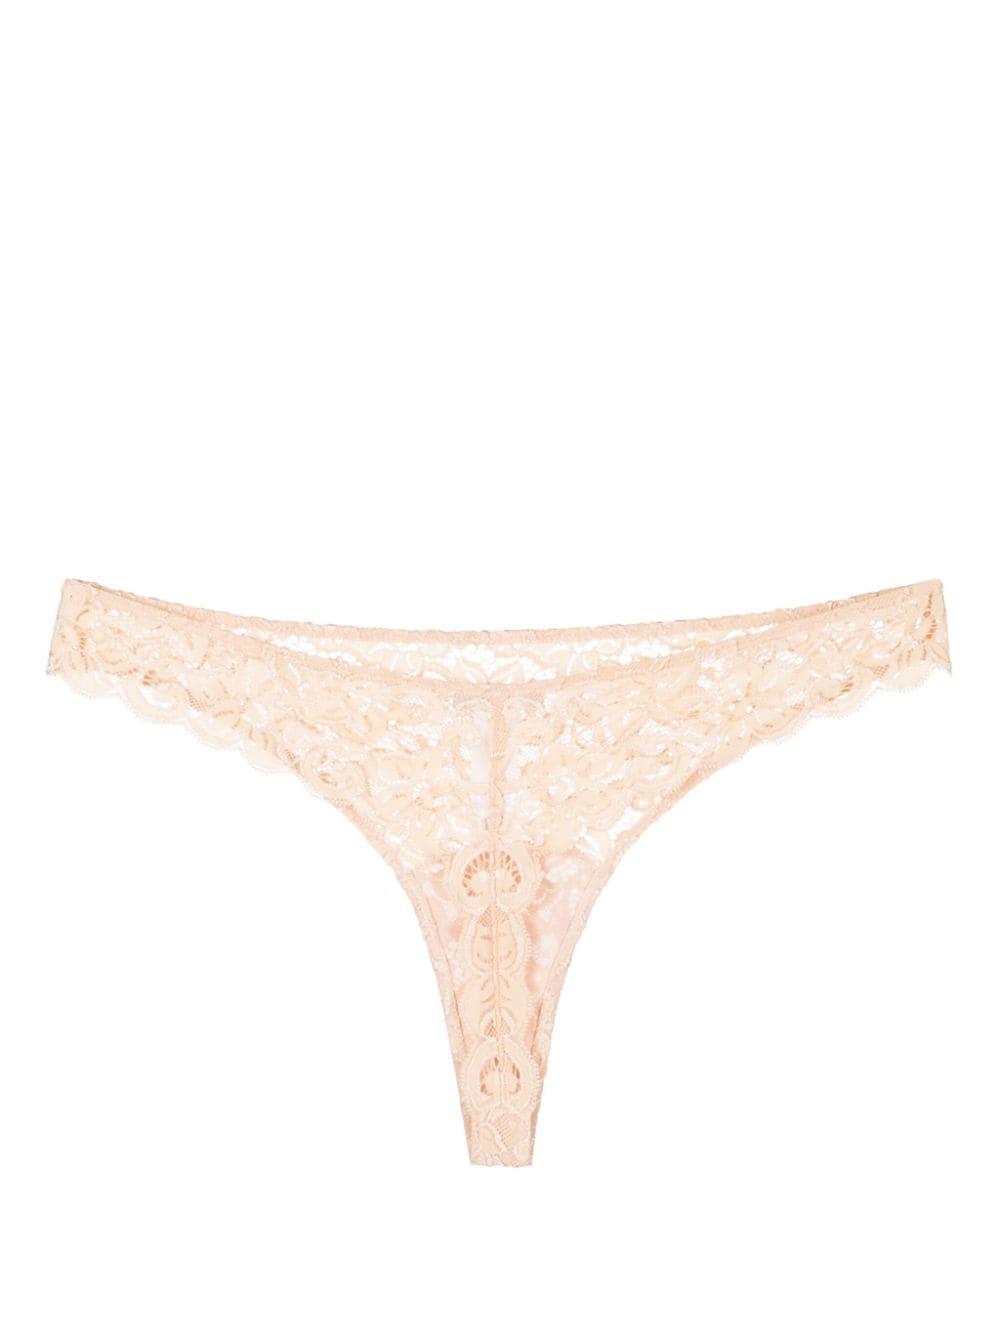 Hanro Moments lace thong - Neutrals